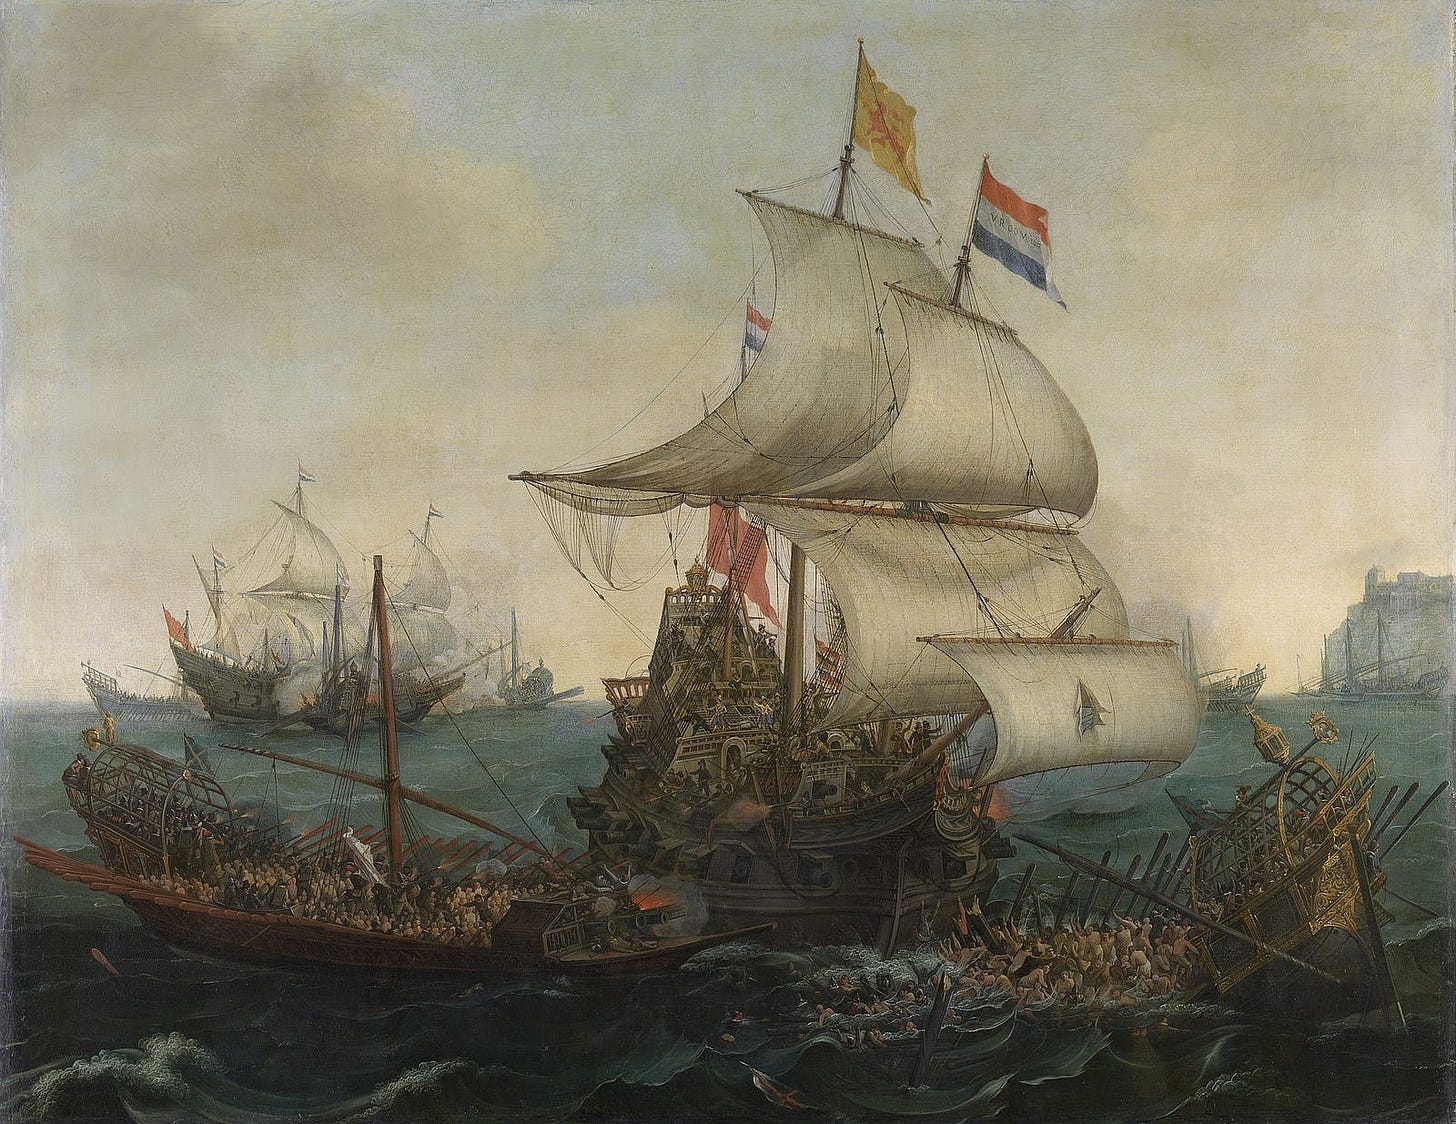 Dutch ships ramming Spanish galleys in the Battle of the Narrow Seas, October 1602